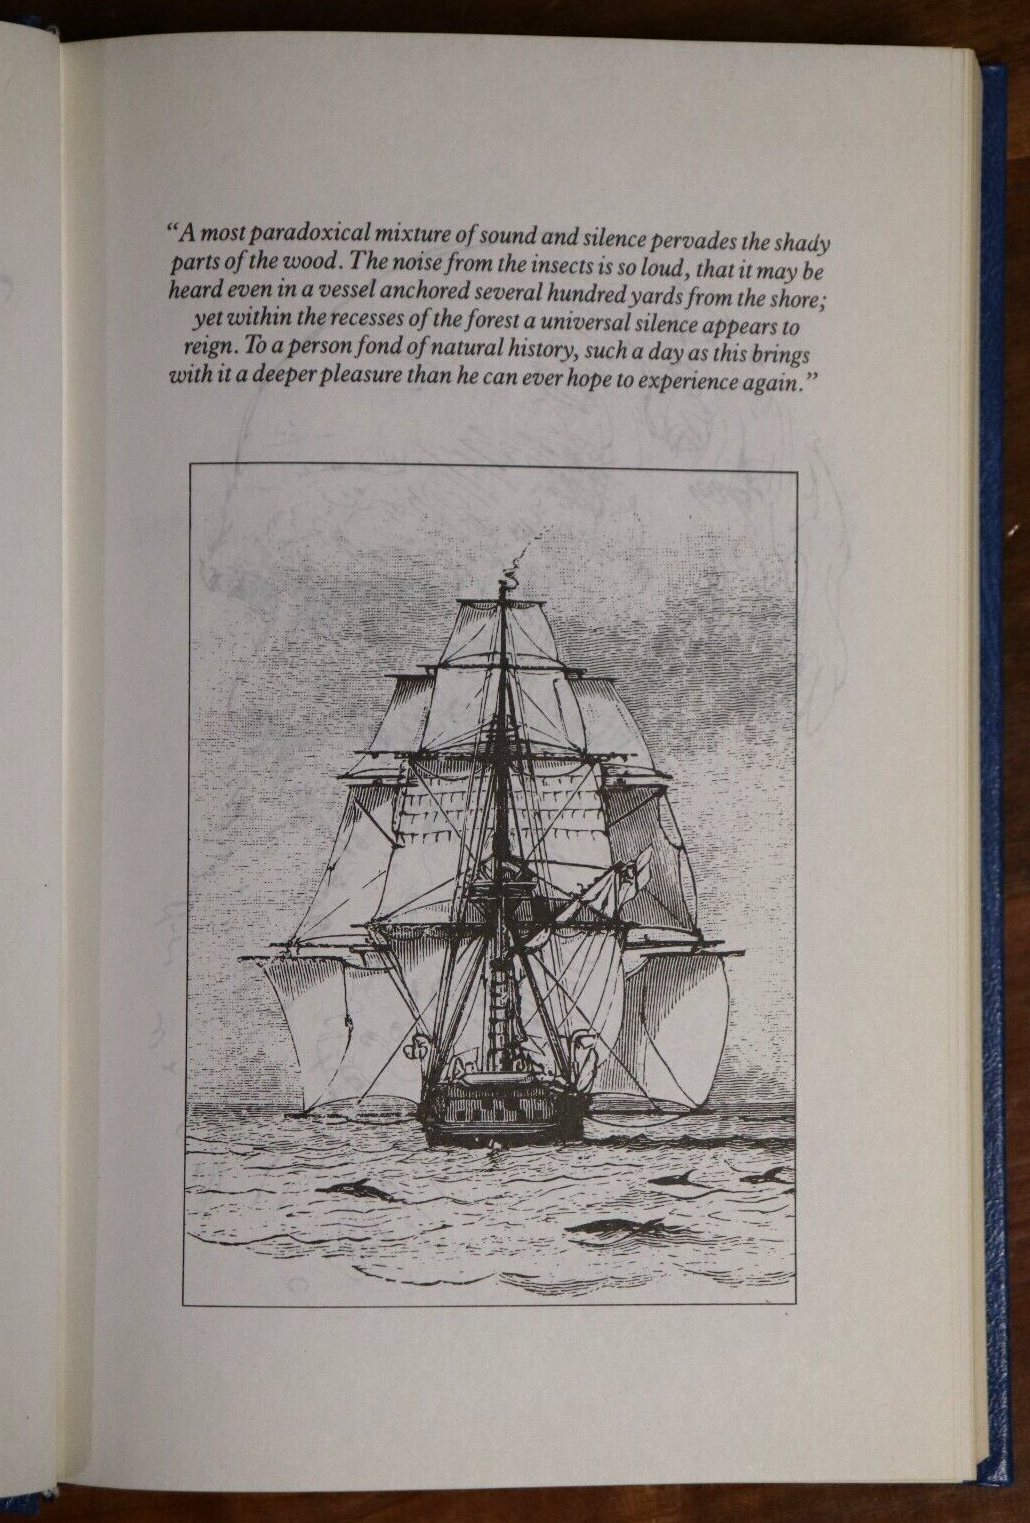 The Voyage Of The Beagle: Charles Darwin - 1987 - Travel & Exploration Book